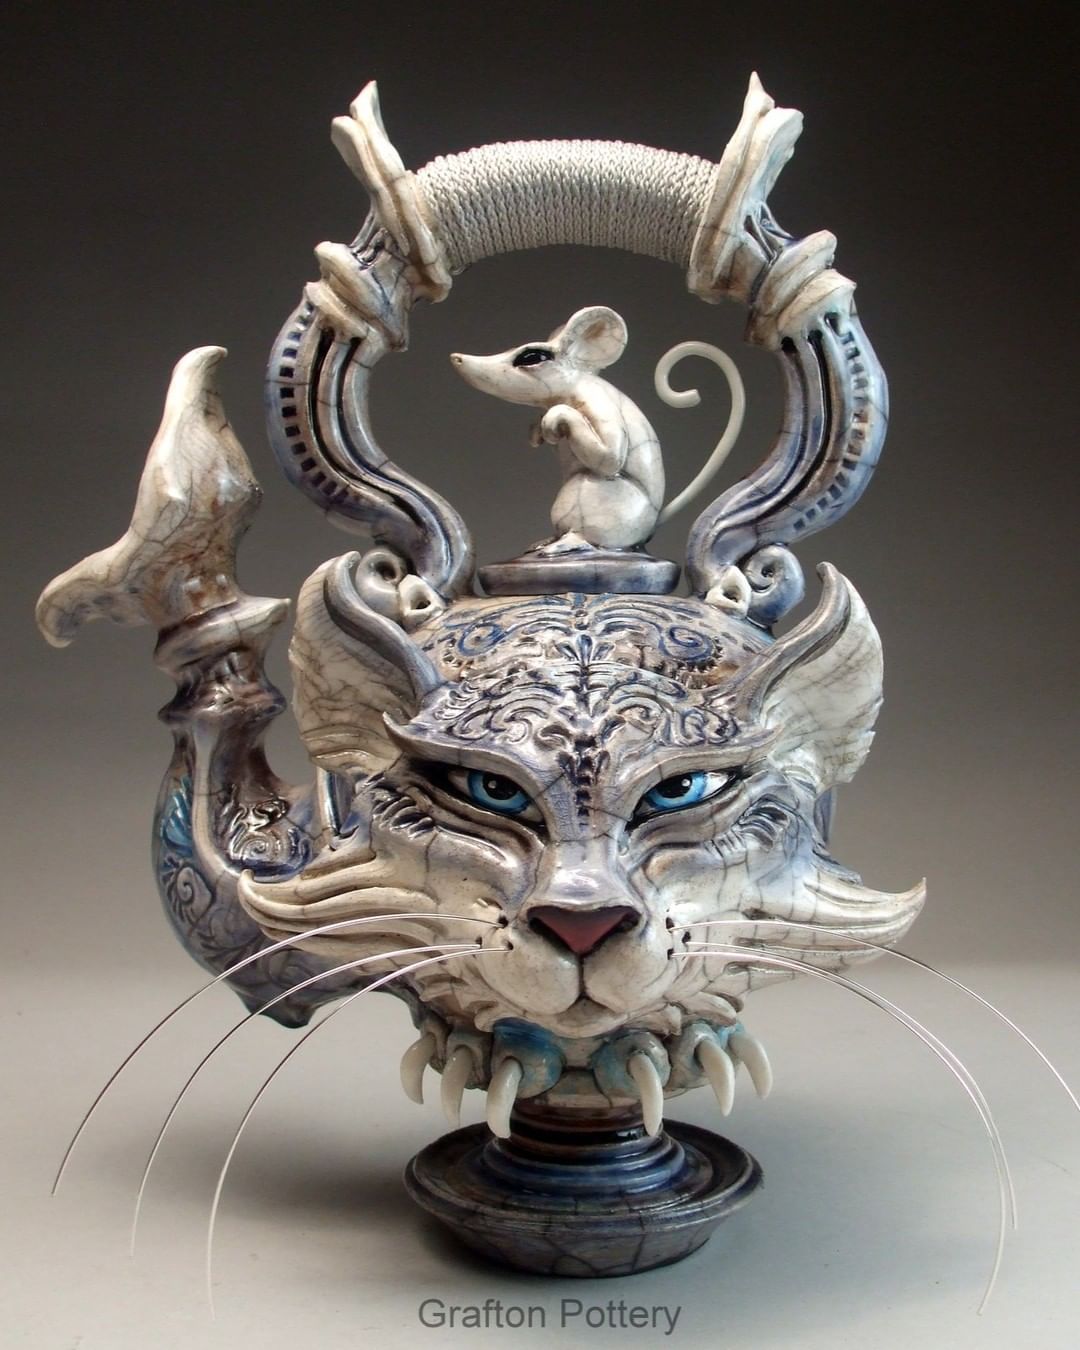 Ceramic Fairytales, Intricate Sculptures, Teapots, And Mugs By Mitchell Grafton (20)